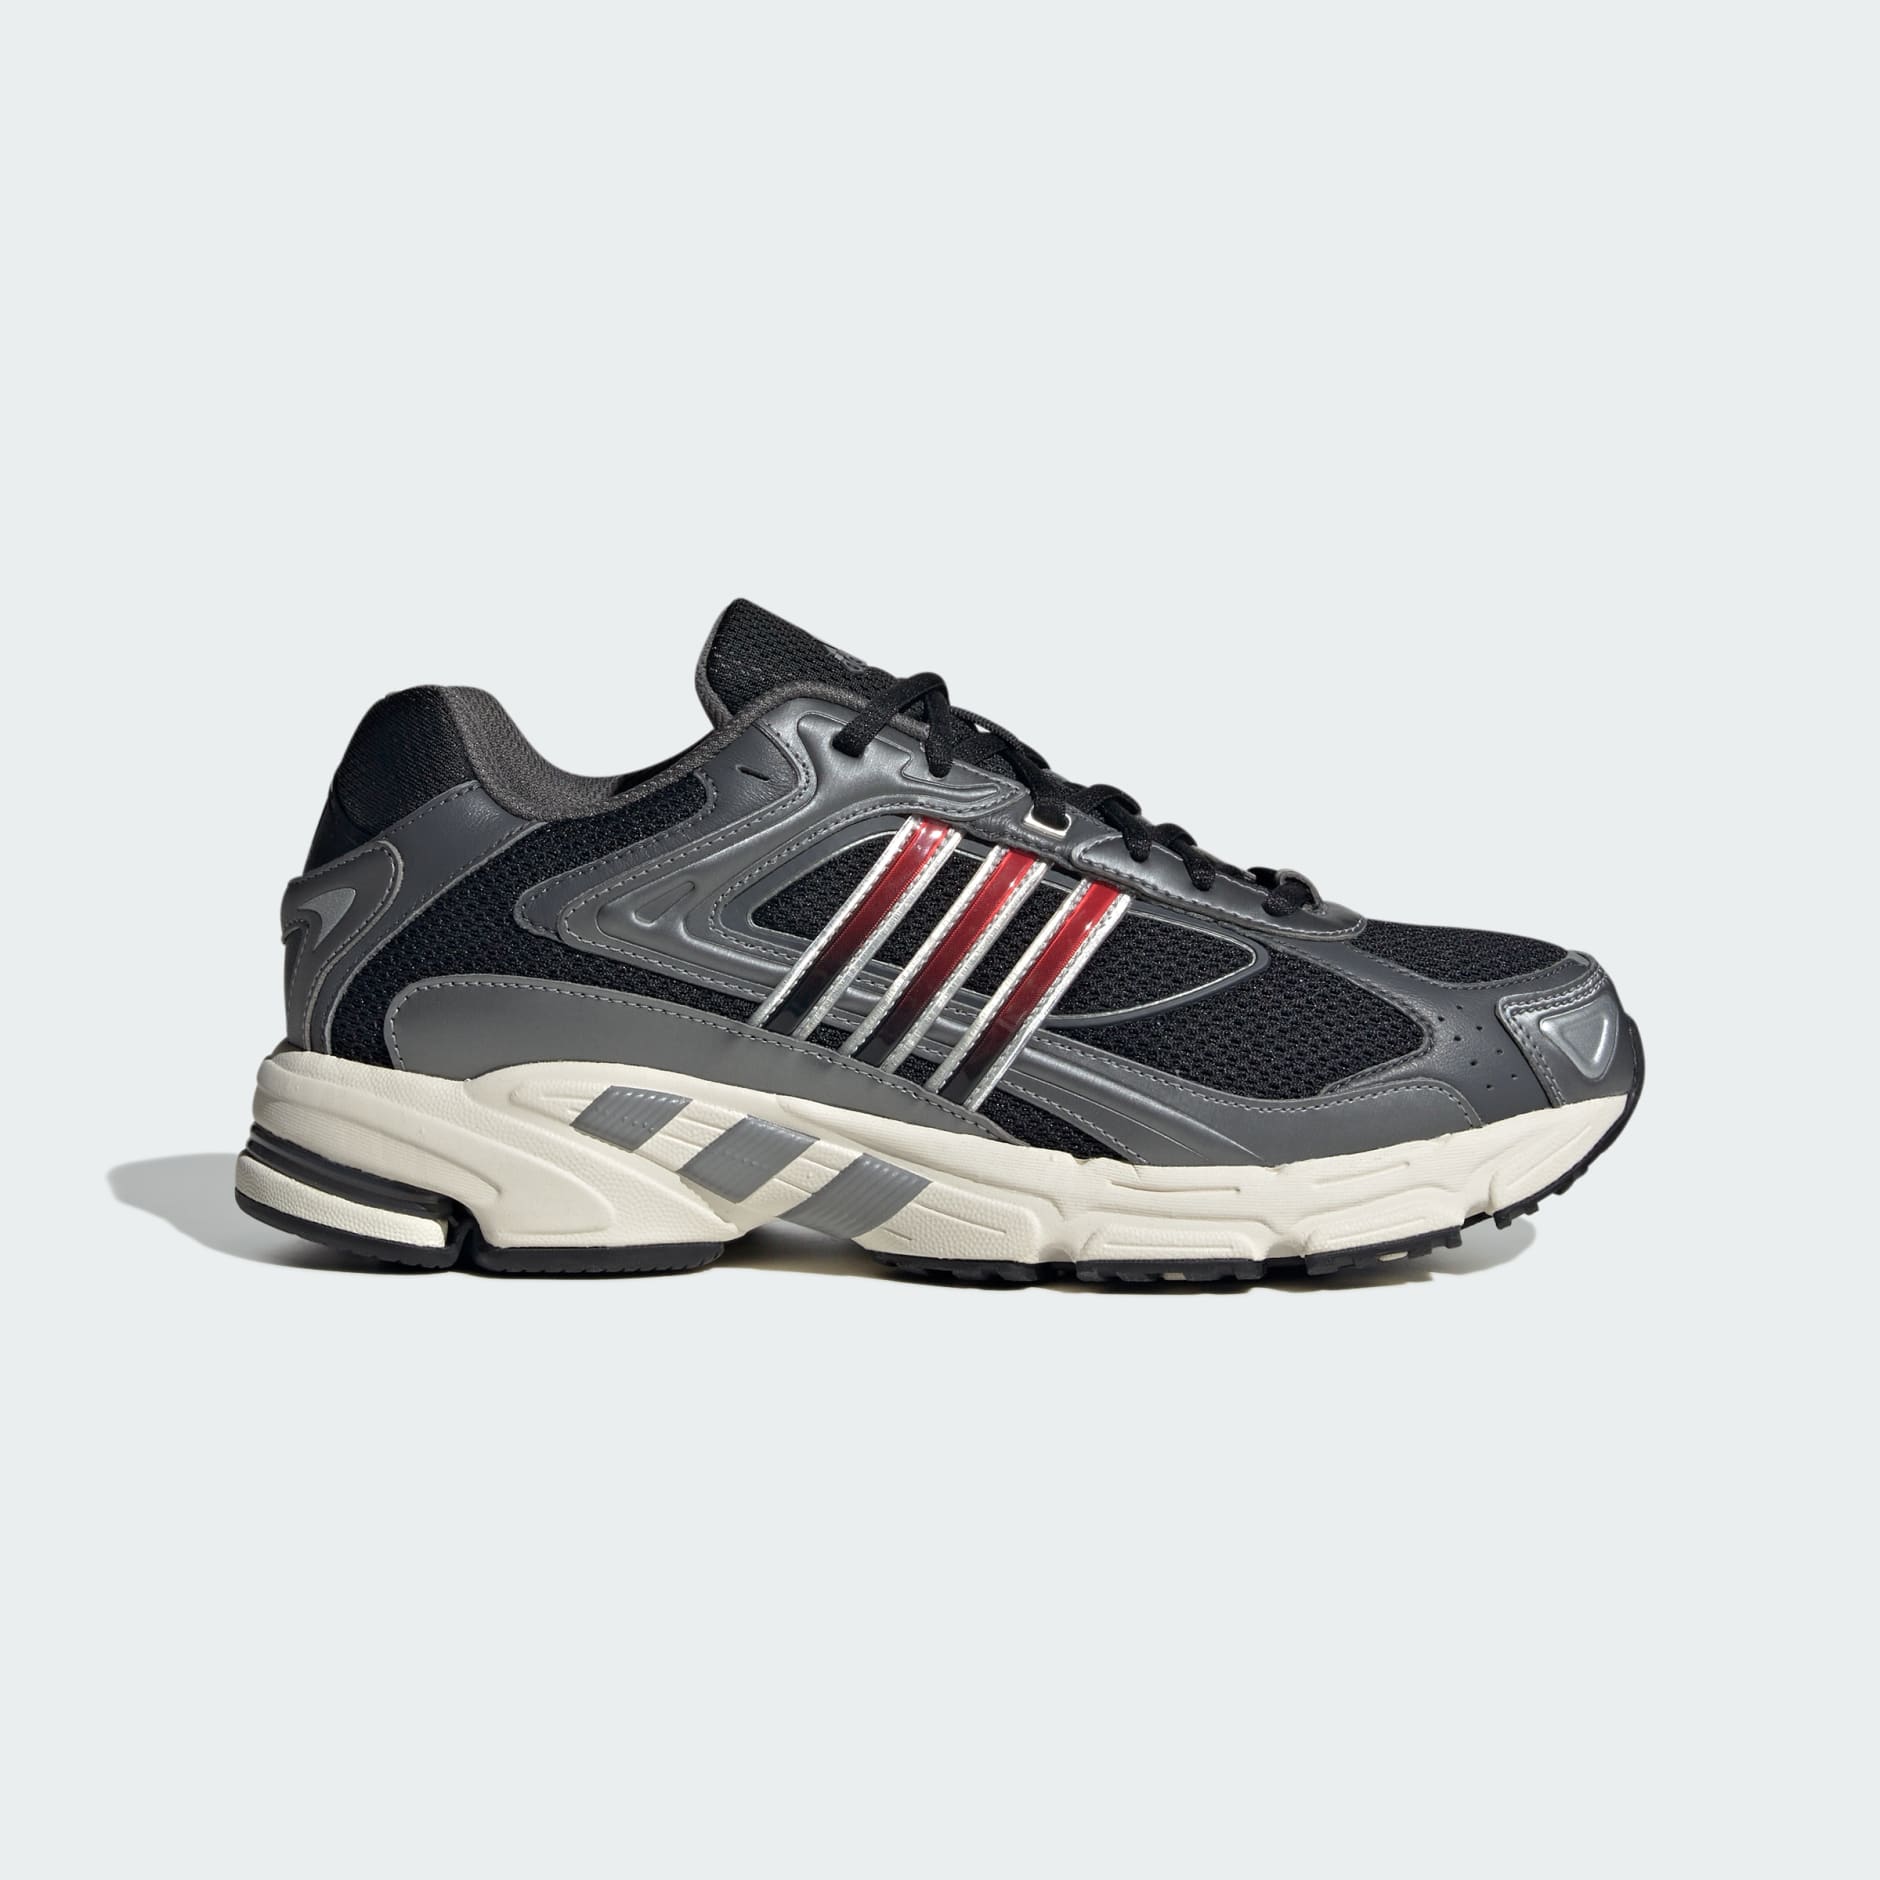 Shoes - Response Shoes - Grey | adidas South Africa